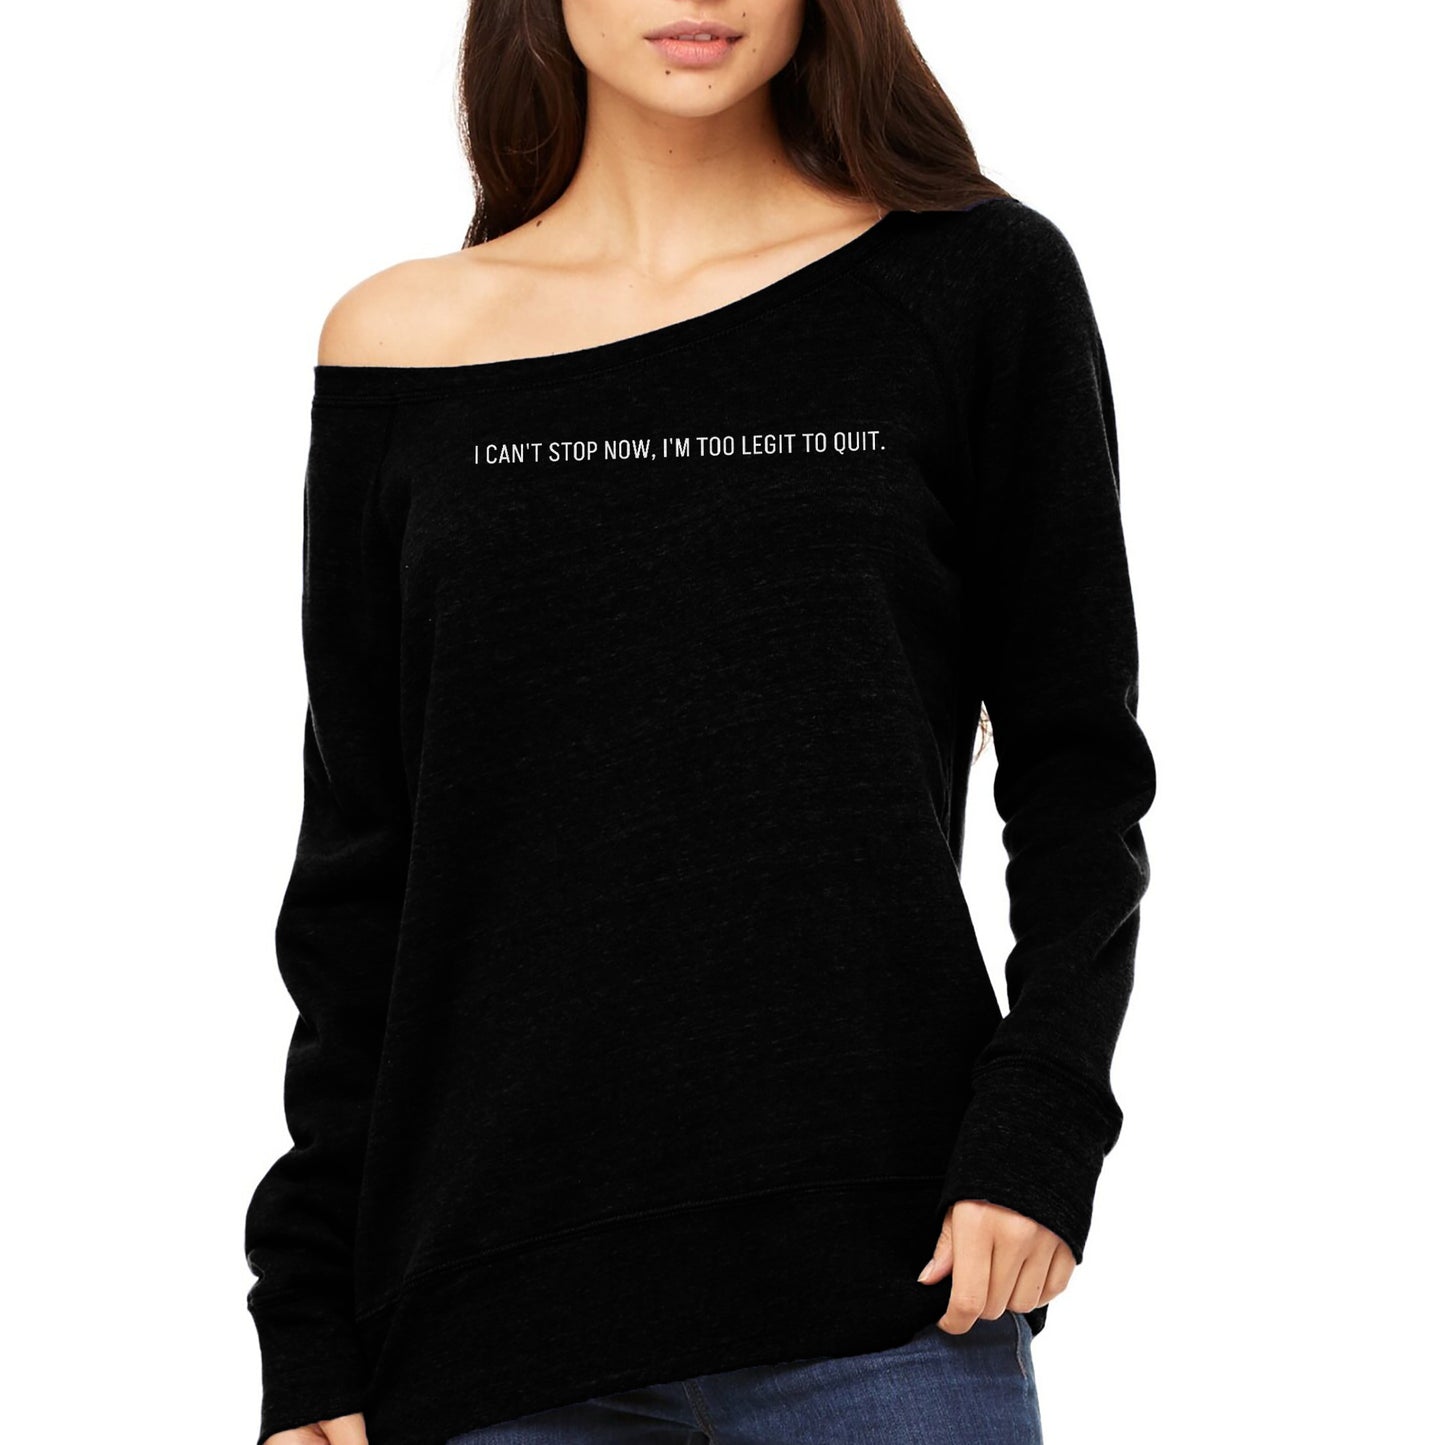 Can't Stop Now, Too Legit to Quit Slouchy Fleece Solid Black Model Image